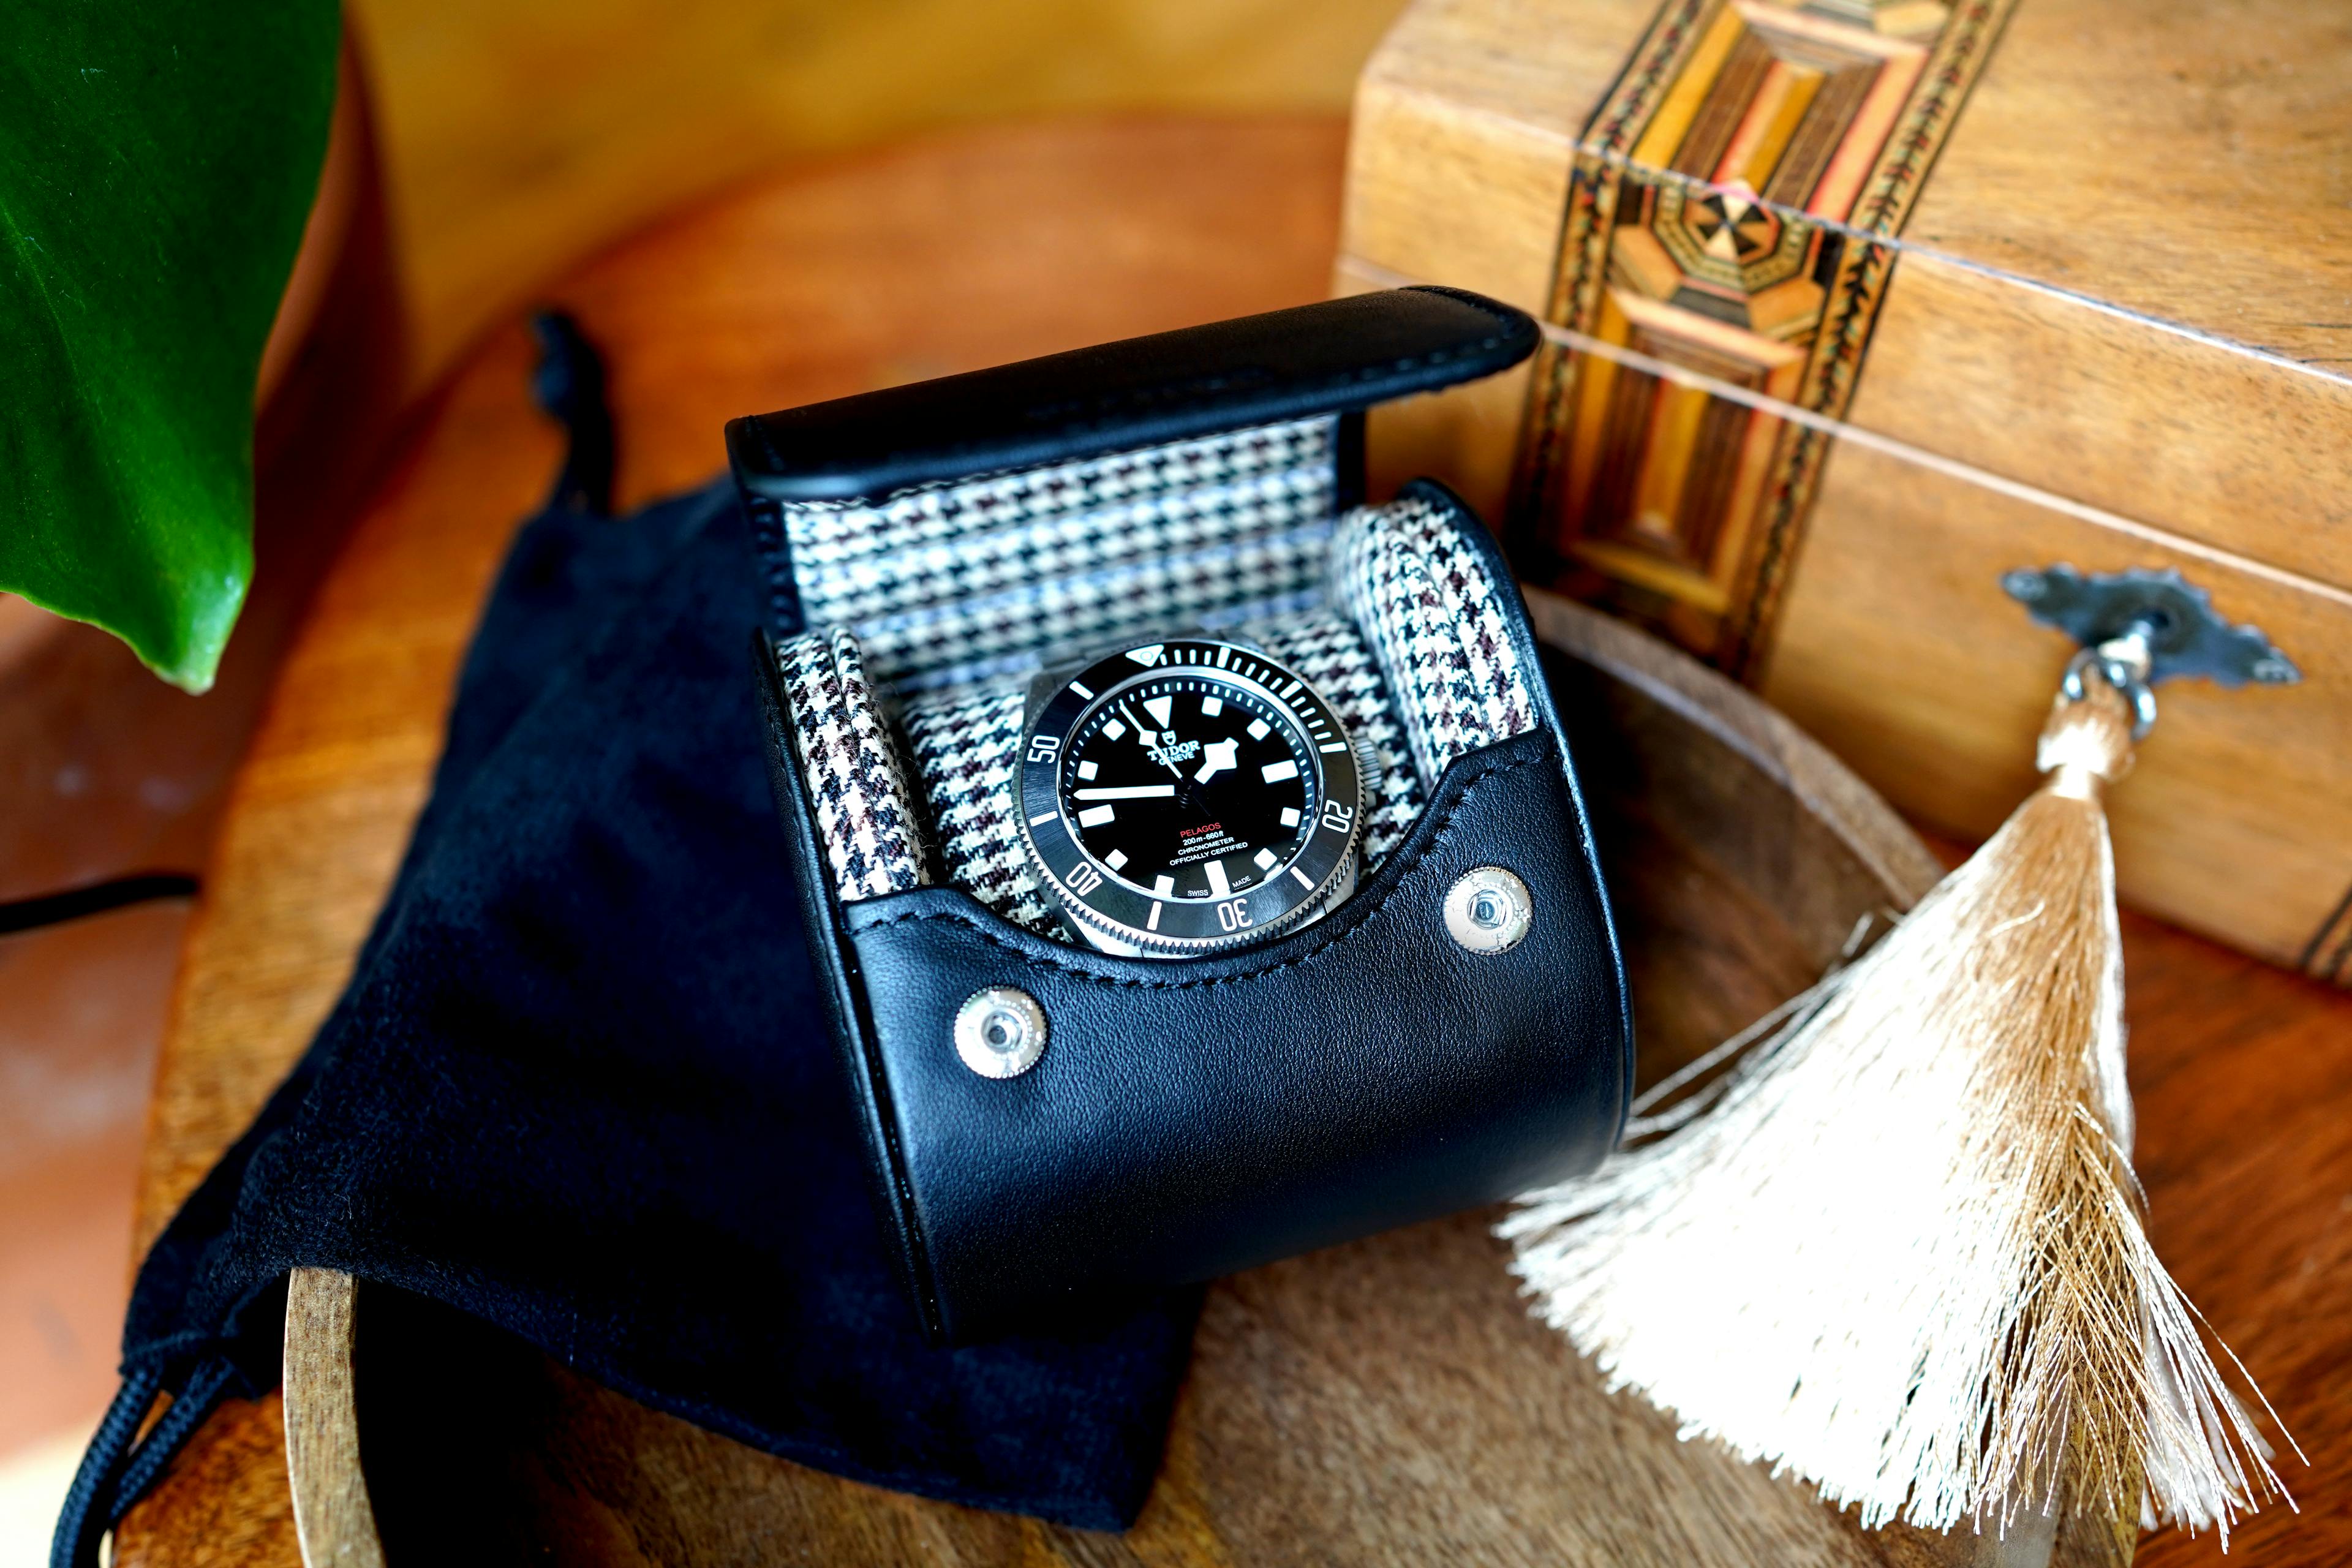 Experience the epitome of luxury and style with our Noir Luxury Watch Case. This exceptional case features a timeless Black Leather exterior and a distinguished Black and Brown Tartan Interior, blending sophistication with functionality effortlessly. Crafted with meticulous attention to detail, it stands as the ultimate protector of your treasured timepieces.

In this captivating scene, our Noir case takes center stage on an outdoor table, framed by the warm glow of a crackling fire and leaning gracefully against a stainless steel wine chiller. The juxtaposition of rugged outdoor elements and refined craftsmanship creates a striking visual narrative. Imagine your watches resting inside, cradled by the sumptuous tartan lining, as you savor the moment by the fireside.

Indulge in the world of luxury watch storage, where every aspect is carefully designed to ensure your watches are not only secure but also beautifully displayed. Whether it's a personal indulgence or a thoughtful gift, our Noir case encapsulates the essence of sophistication and safeguarding. Discover the perfect companion for your watches, where elegance meets the great outdoors.